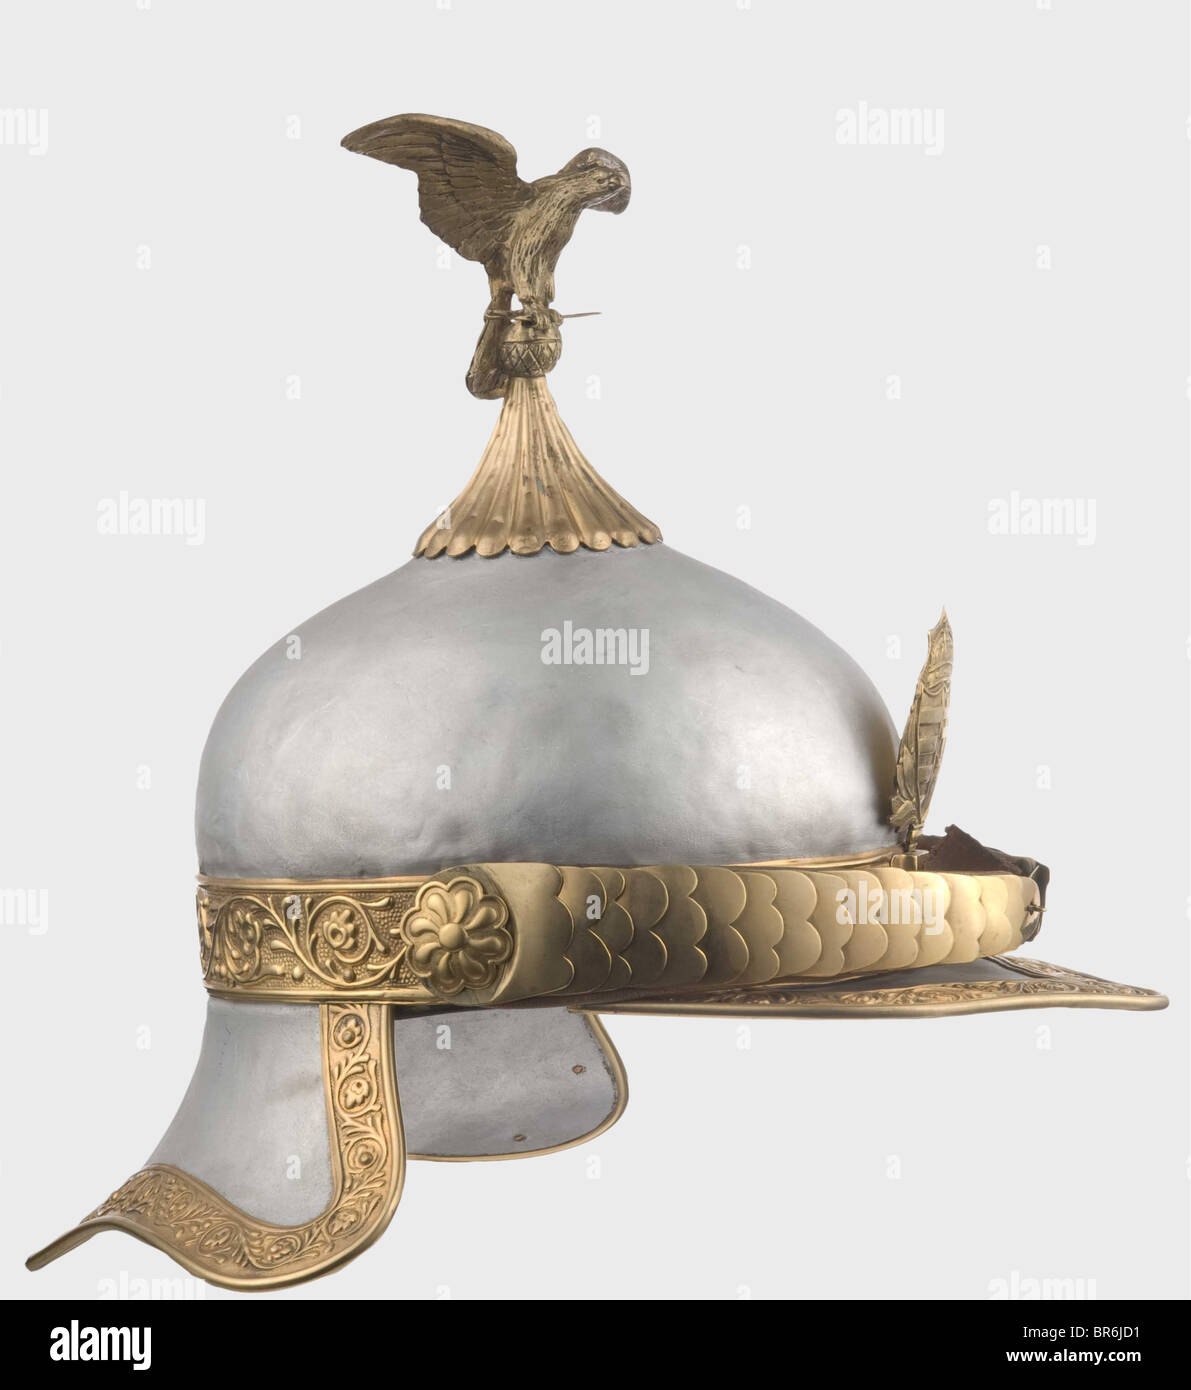 A helmet for generals, 1924 - 1931. Drawn aluminium skull, the surface smoothed and coated with silverbronze. Embossed and gilt brass bands along the perimeter, gilt chinscales, coat of arms emblem and fluted crown piece. The helmet surmounted by a brass eagle carrying a sabre in its talons (original?). Black lining of leather and cloth. historic, historical, 1920s, 1930s, 20th century, 20th century, helmet, helmets, headgear, headgears, protection, protective, uniform, uniforms, utensil, piece of equipment, utensils, outfit, outfits, headpiece, headpieces, obj, Stock Photo